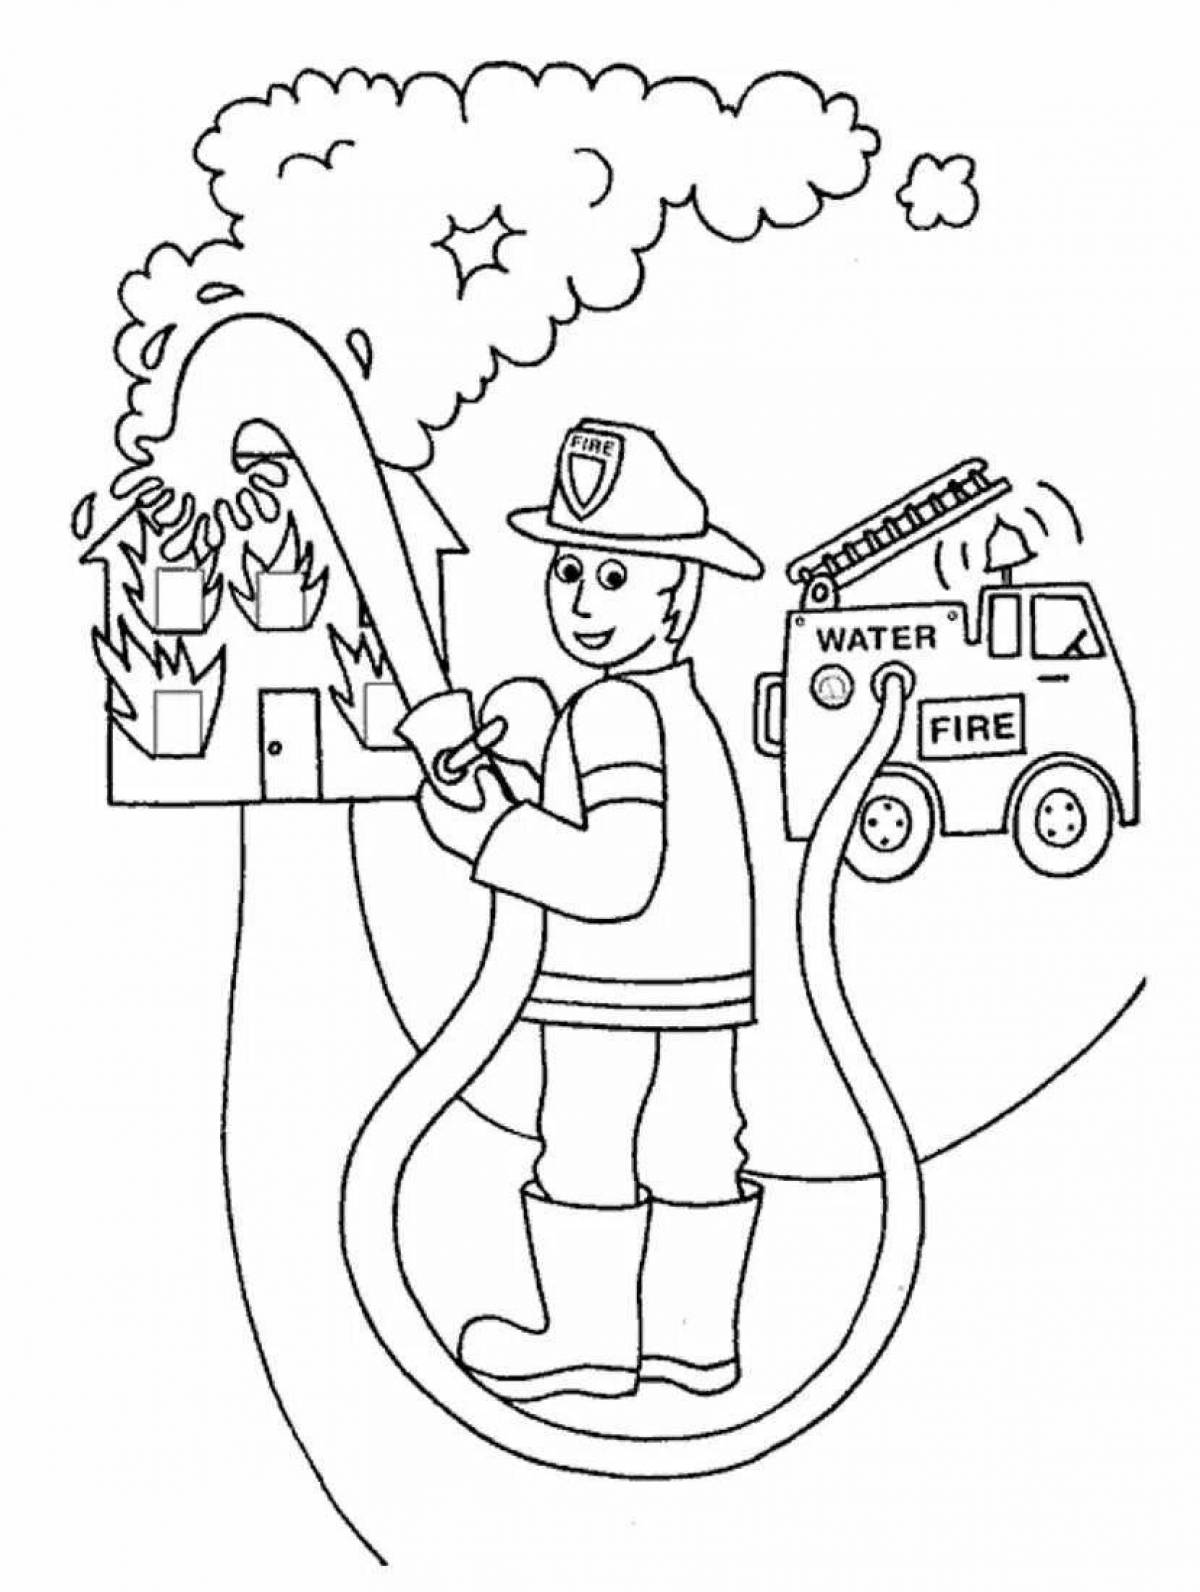 Coloring book joyful fire safety